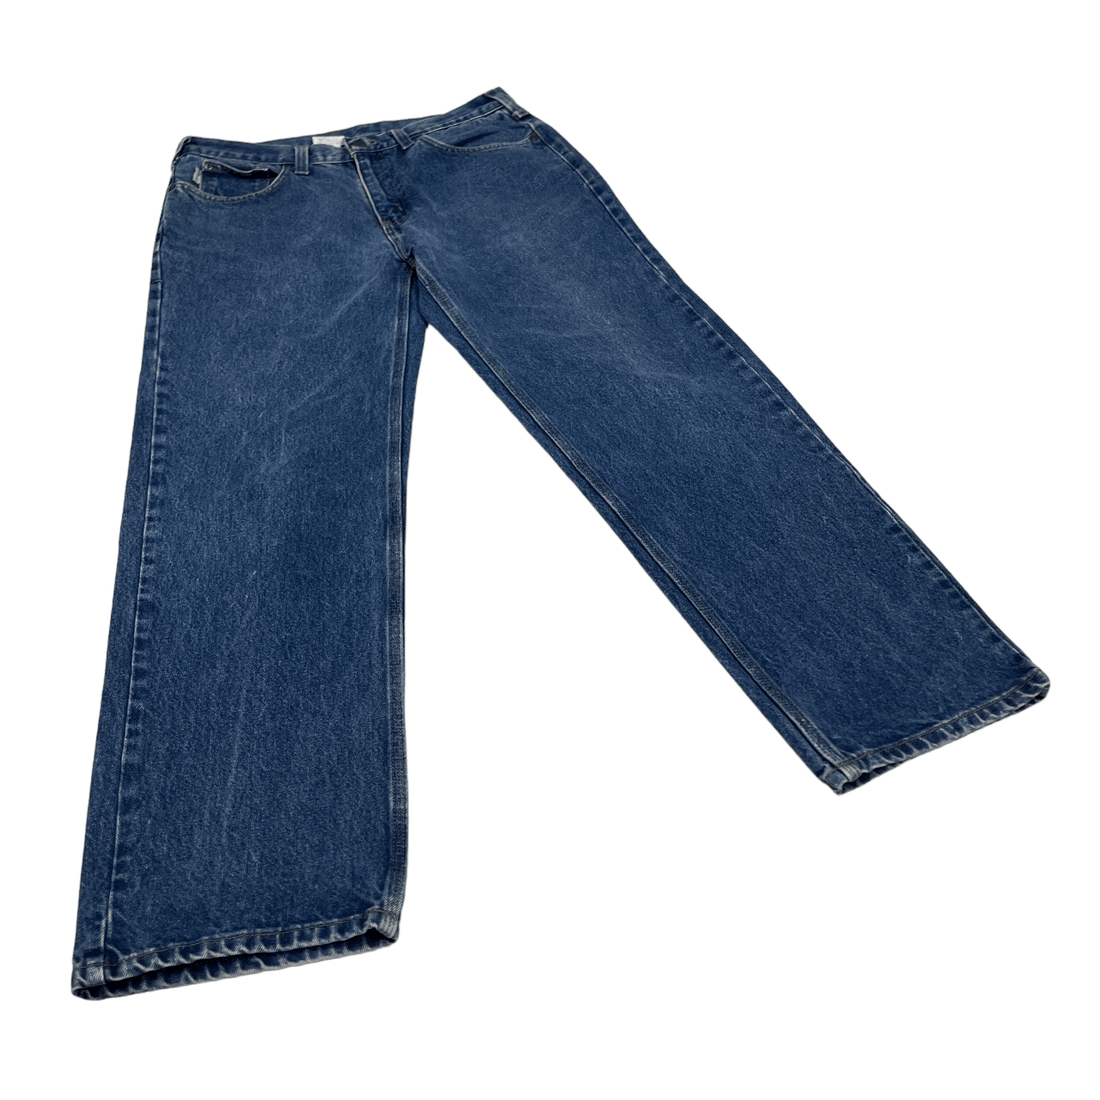 Vintage Carharrt Relaxed Fit Jeans - 34” x 30” - The Streetwear Studio